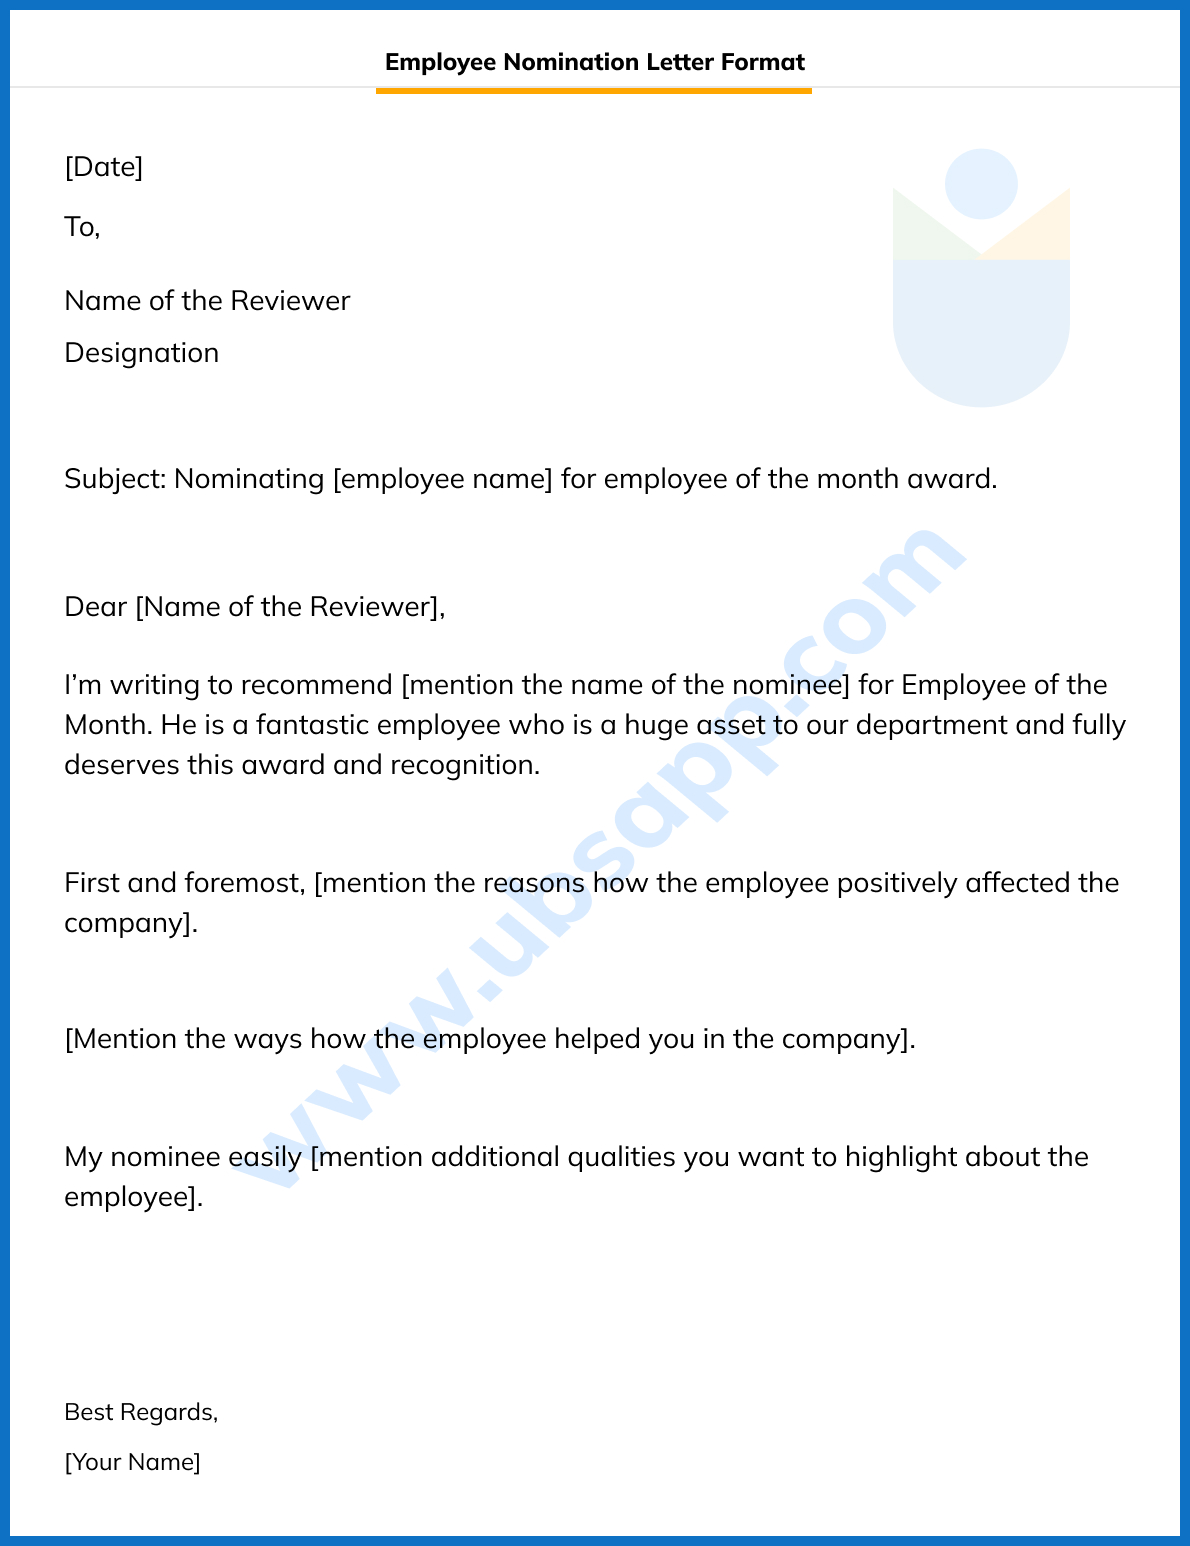 Employee Nomination Letter Format